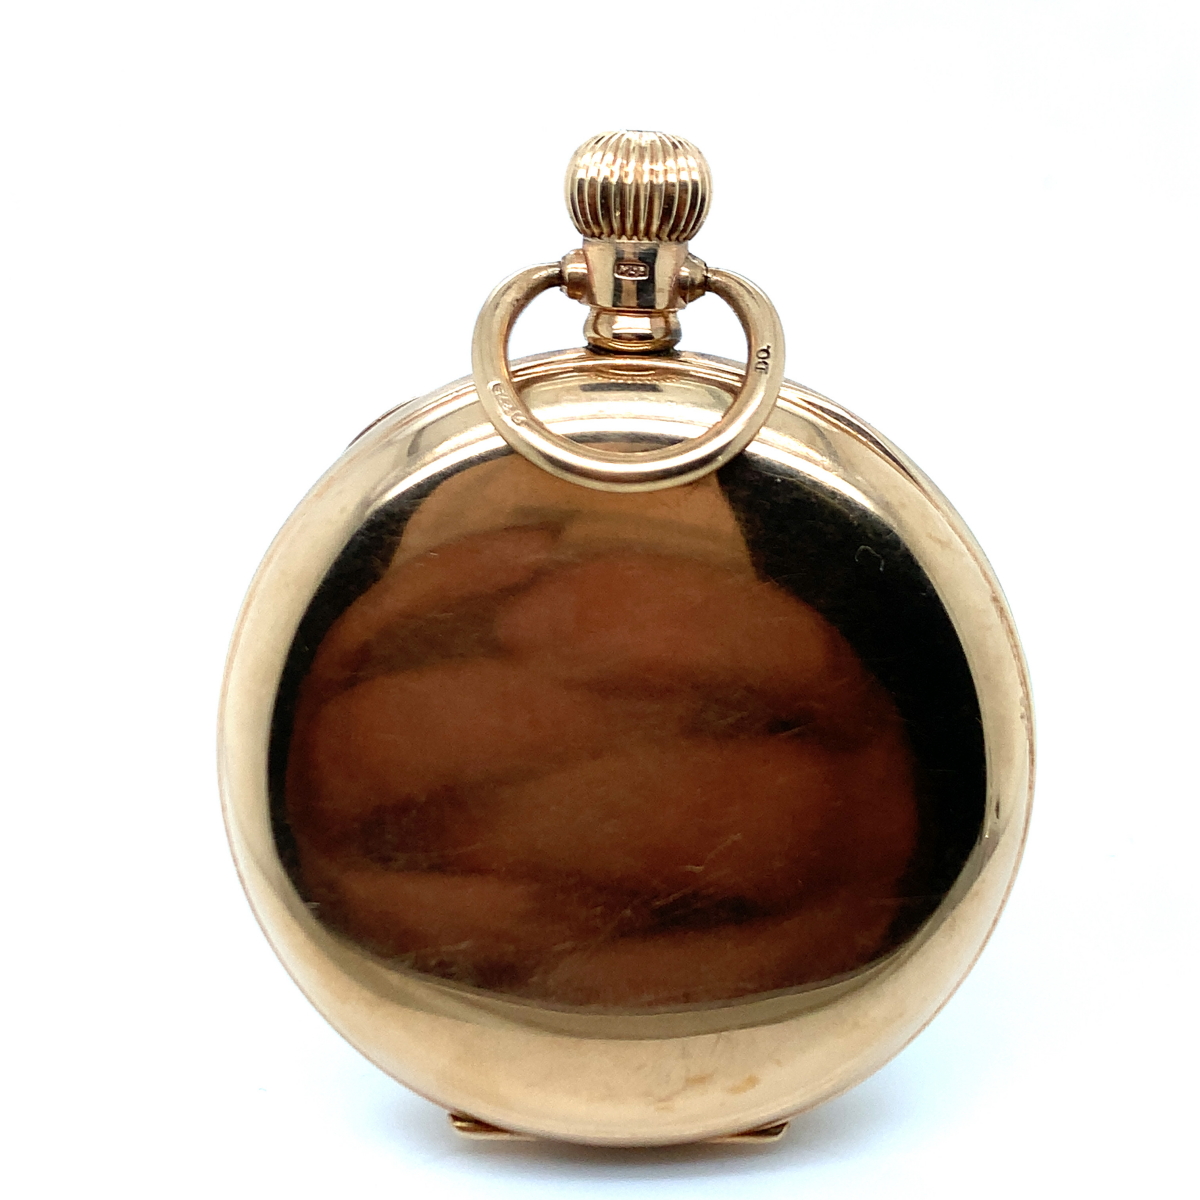 A 9ct HALLMARKED GOLD OPEN FACE ELGIN POCKET WATCH. THE INNER CASE DATED 1922, BIRMINGHAM, A.L.D, - Image 6 of 9